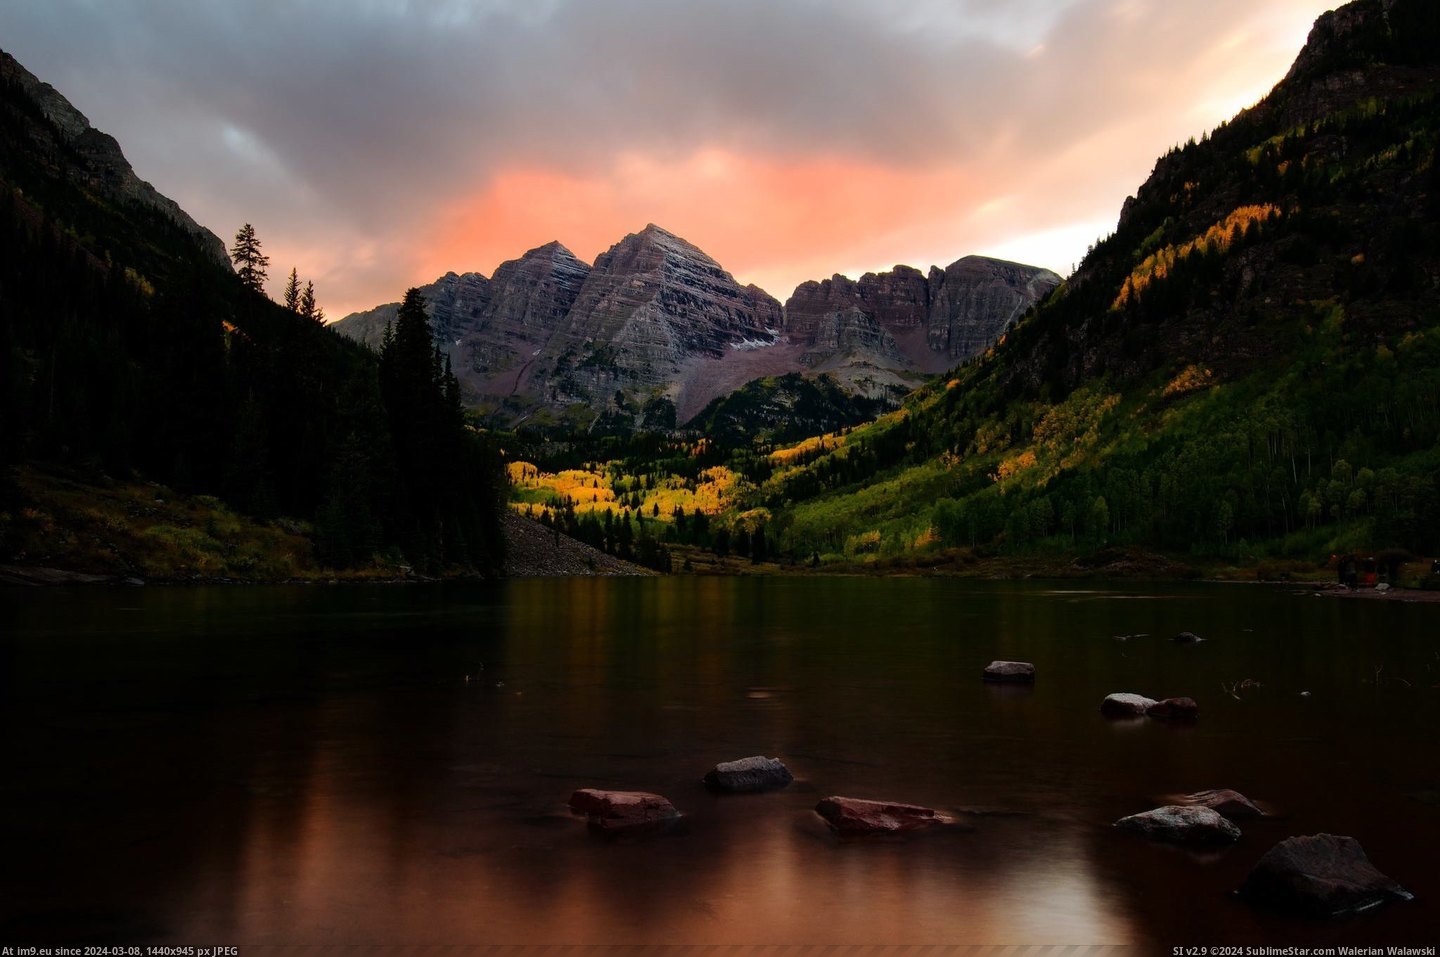 #Sunrise #Bells #Amaze #Maroon #Cease [Earthporn] The Maroon Bells at sunrise never cease to amaze.  [2048x1356] Pic. (Image of album My r/EARTHPORN favs))